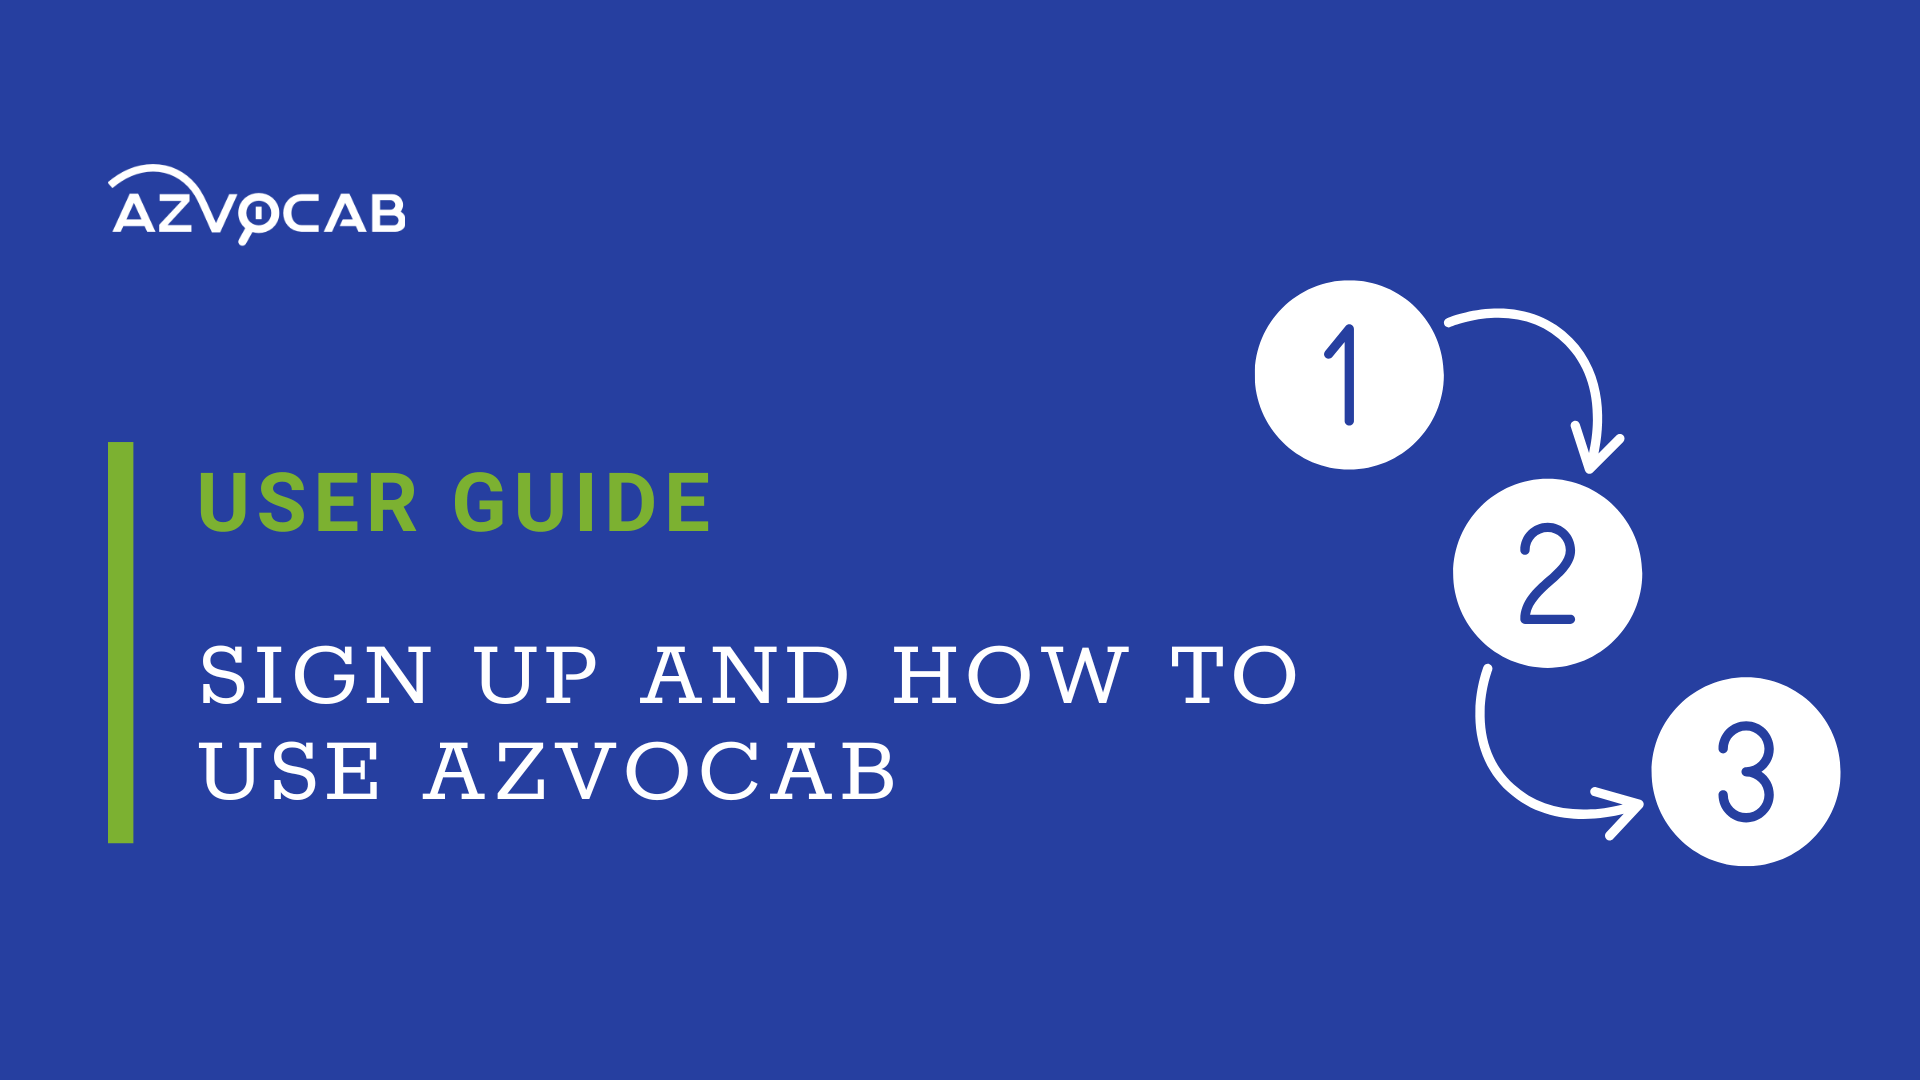 Sign up and how to use azVocab